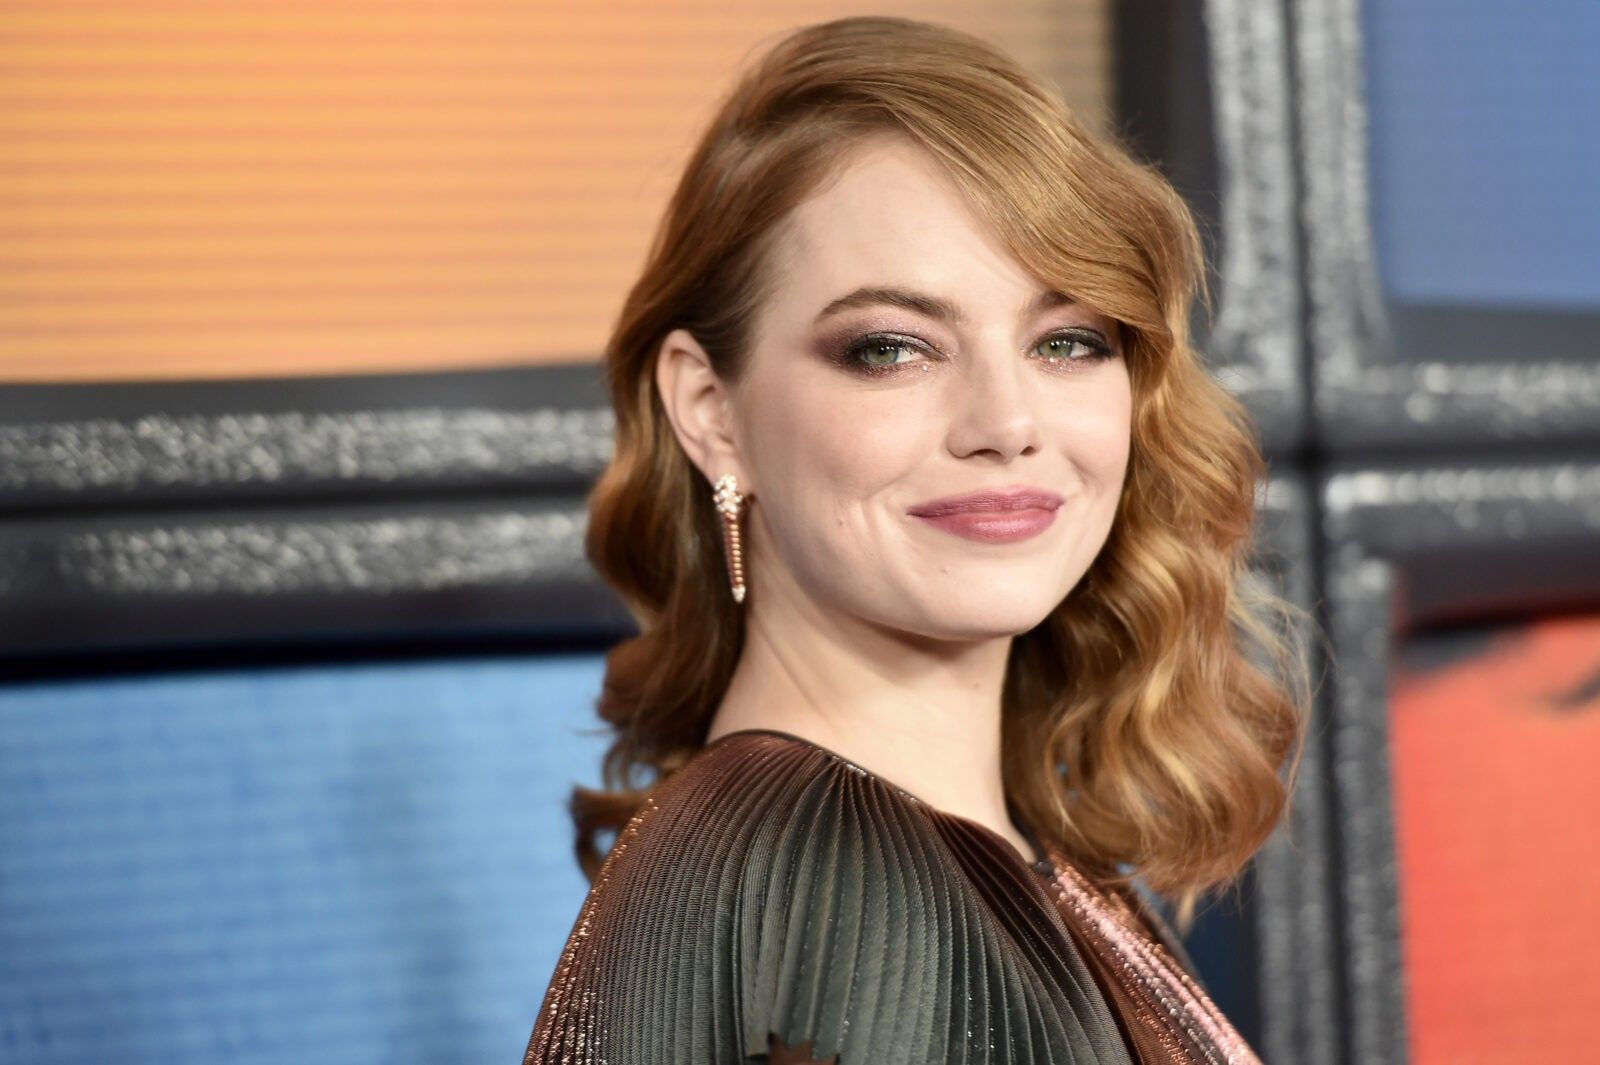 Emma Stone Encourages People to Keep Talking About How they Feel - NewBeauty